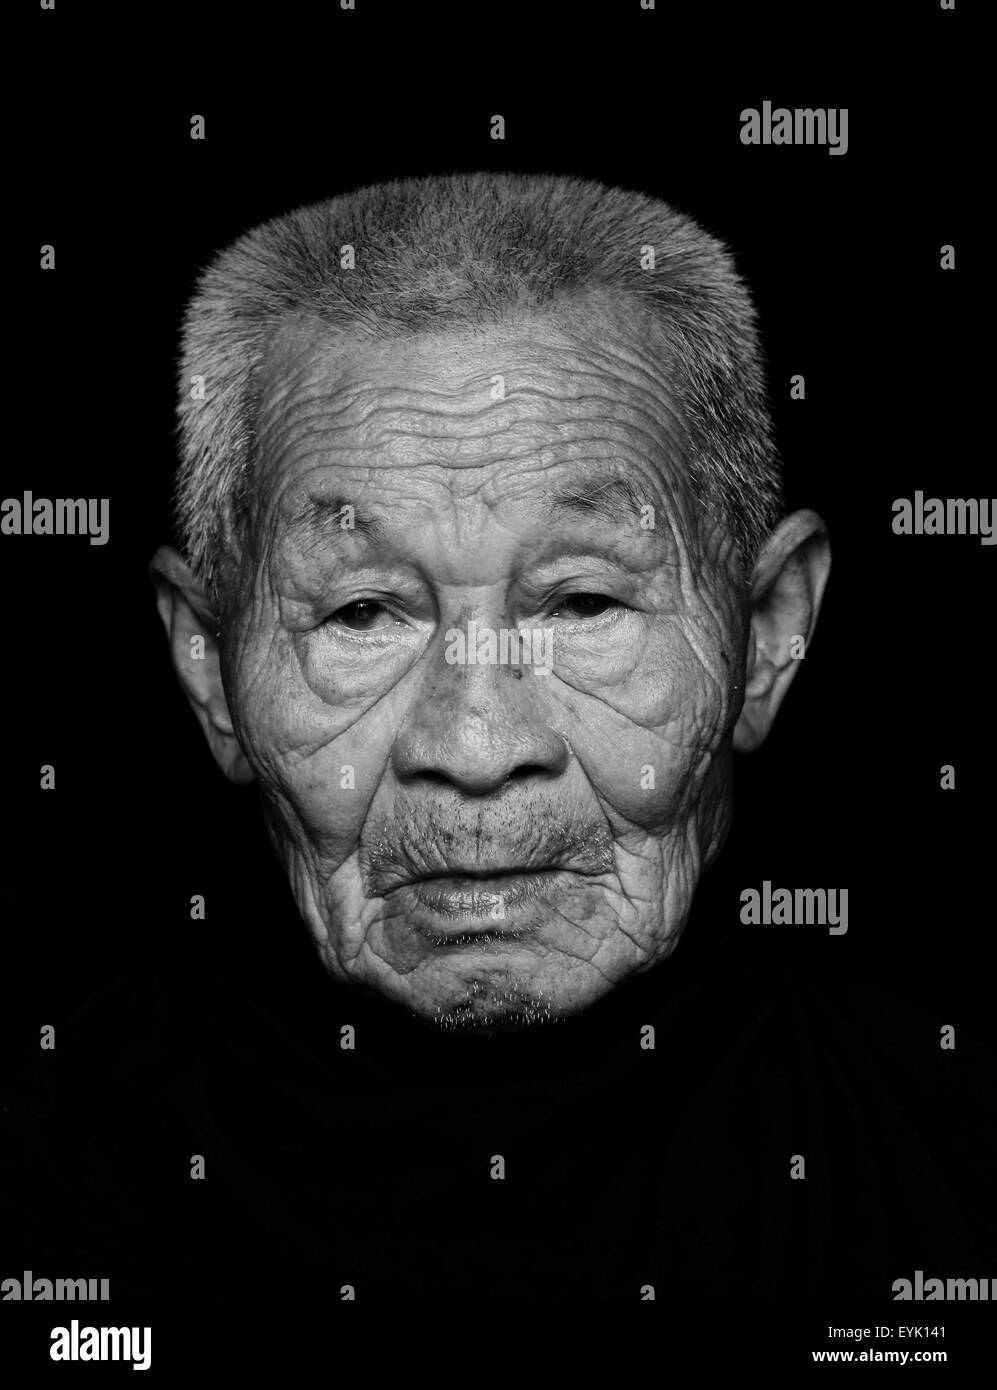 May 24, 2015 - CHN - CHINA - May 24 2015: (EDITORIAL USE ONLY. CHINA OUT)(MINIMUM PRICE: 100 USD) Liu Deqin: Male, born in 1924 and now lives in Maomingguangdong. He was caught for conscription and sent to 3rd Battlion 453rd Regiment 151st Division 62nd Corp National Revolutional Army. They had a fierce combat with Japanese army in Hengyang Hunan in 1941, it lasted from 4th May to 13th September, and 10th Corp defended the inside city, 62th Corp stationed outside the city. When 10th Corp was surrounded by enemies, 453rd Regiment was surrounded by Japanese for 3 days in Hengyang Santang, and no Stock Photo